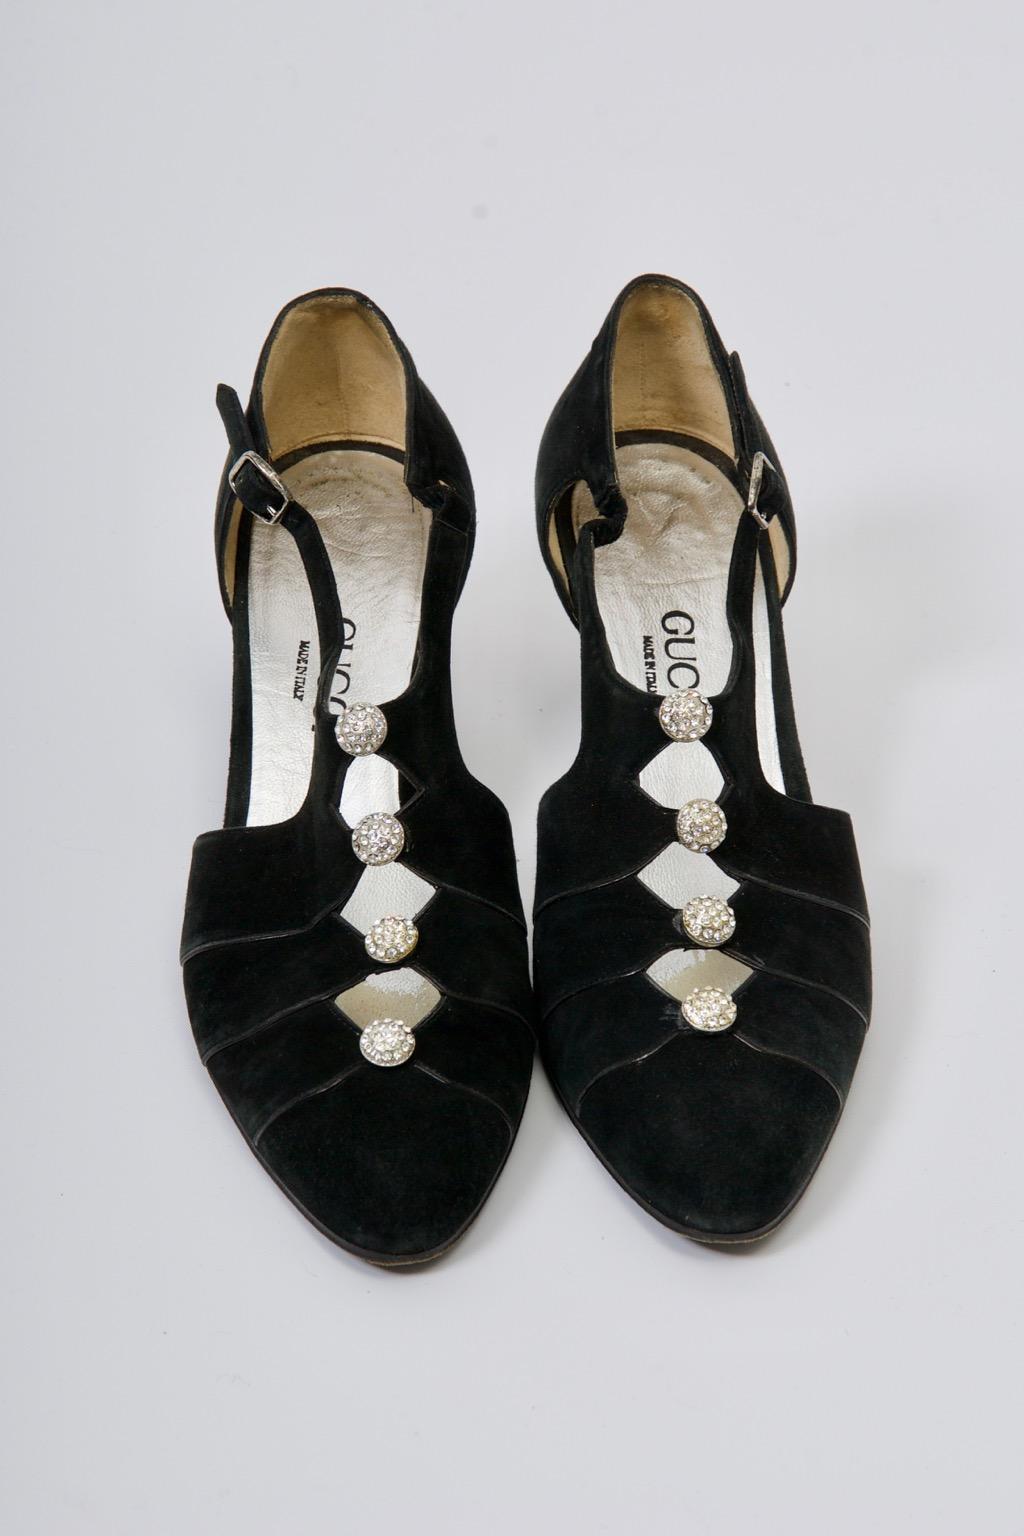 Gucci Black Suede Shoes with Rhinestone Accents 4